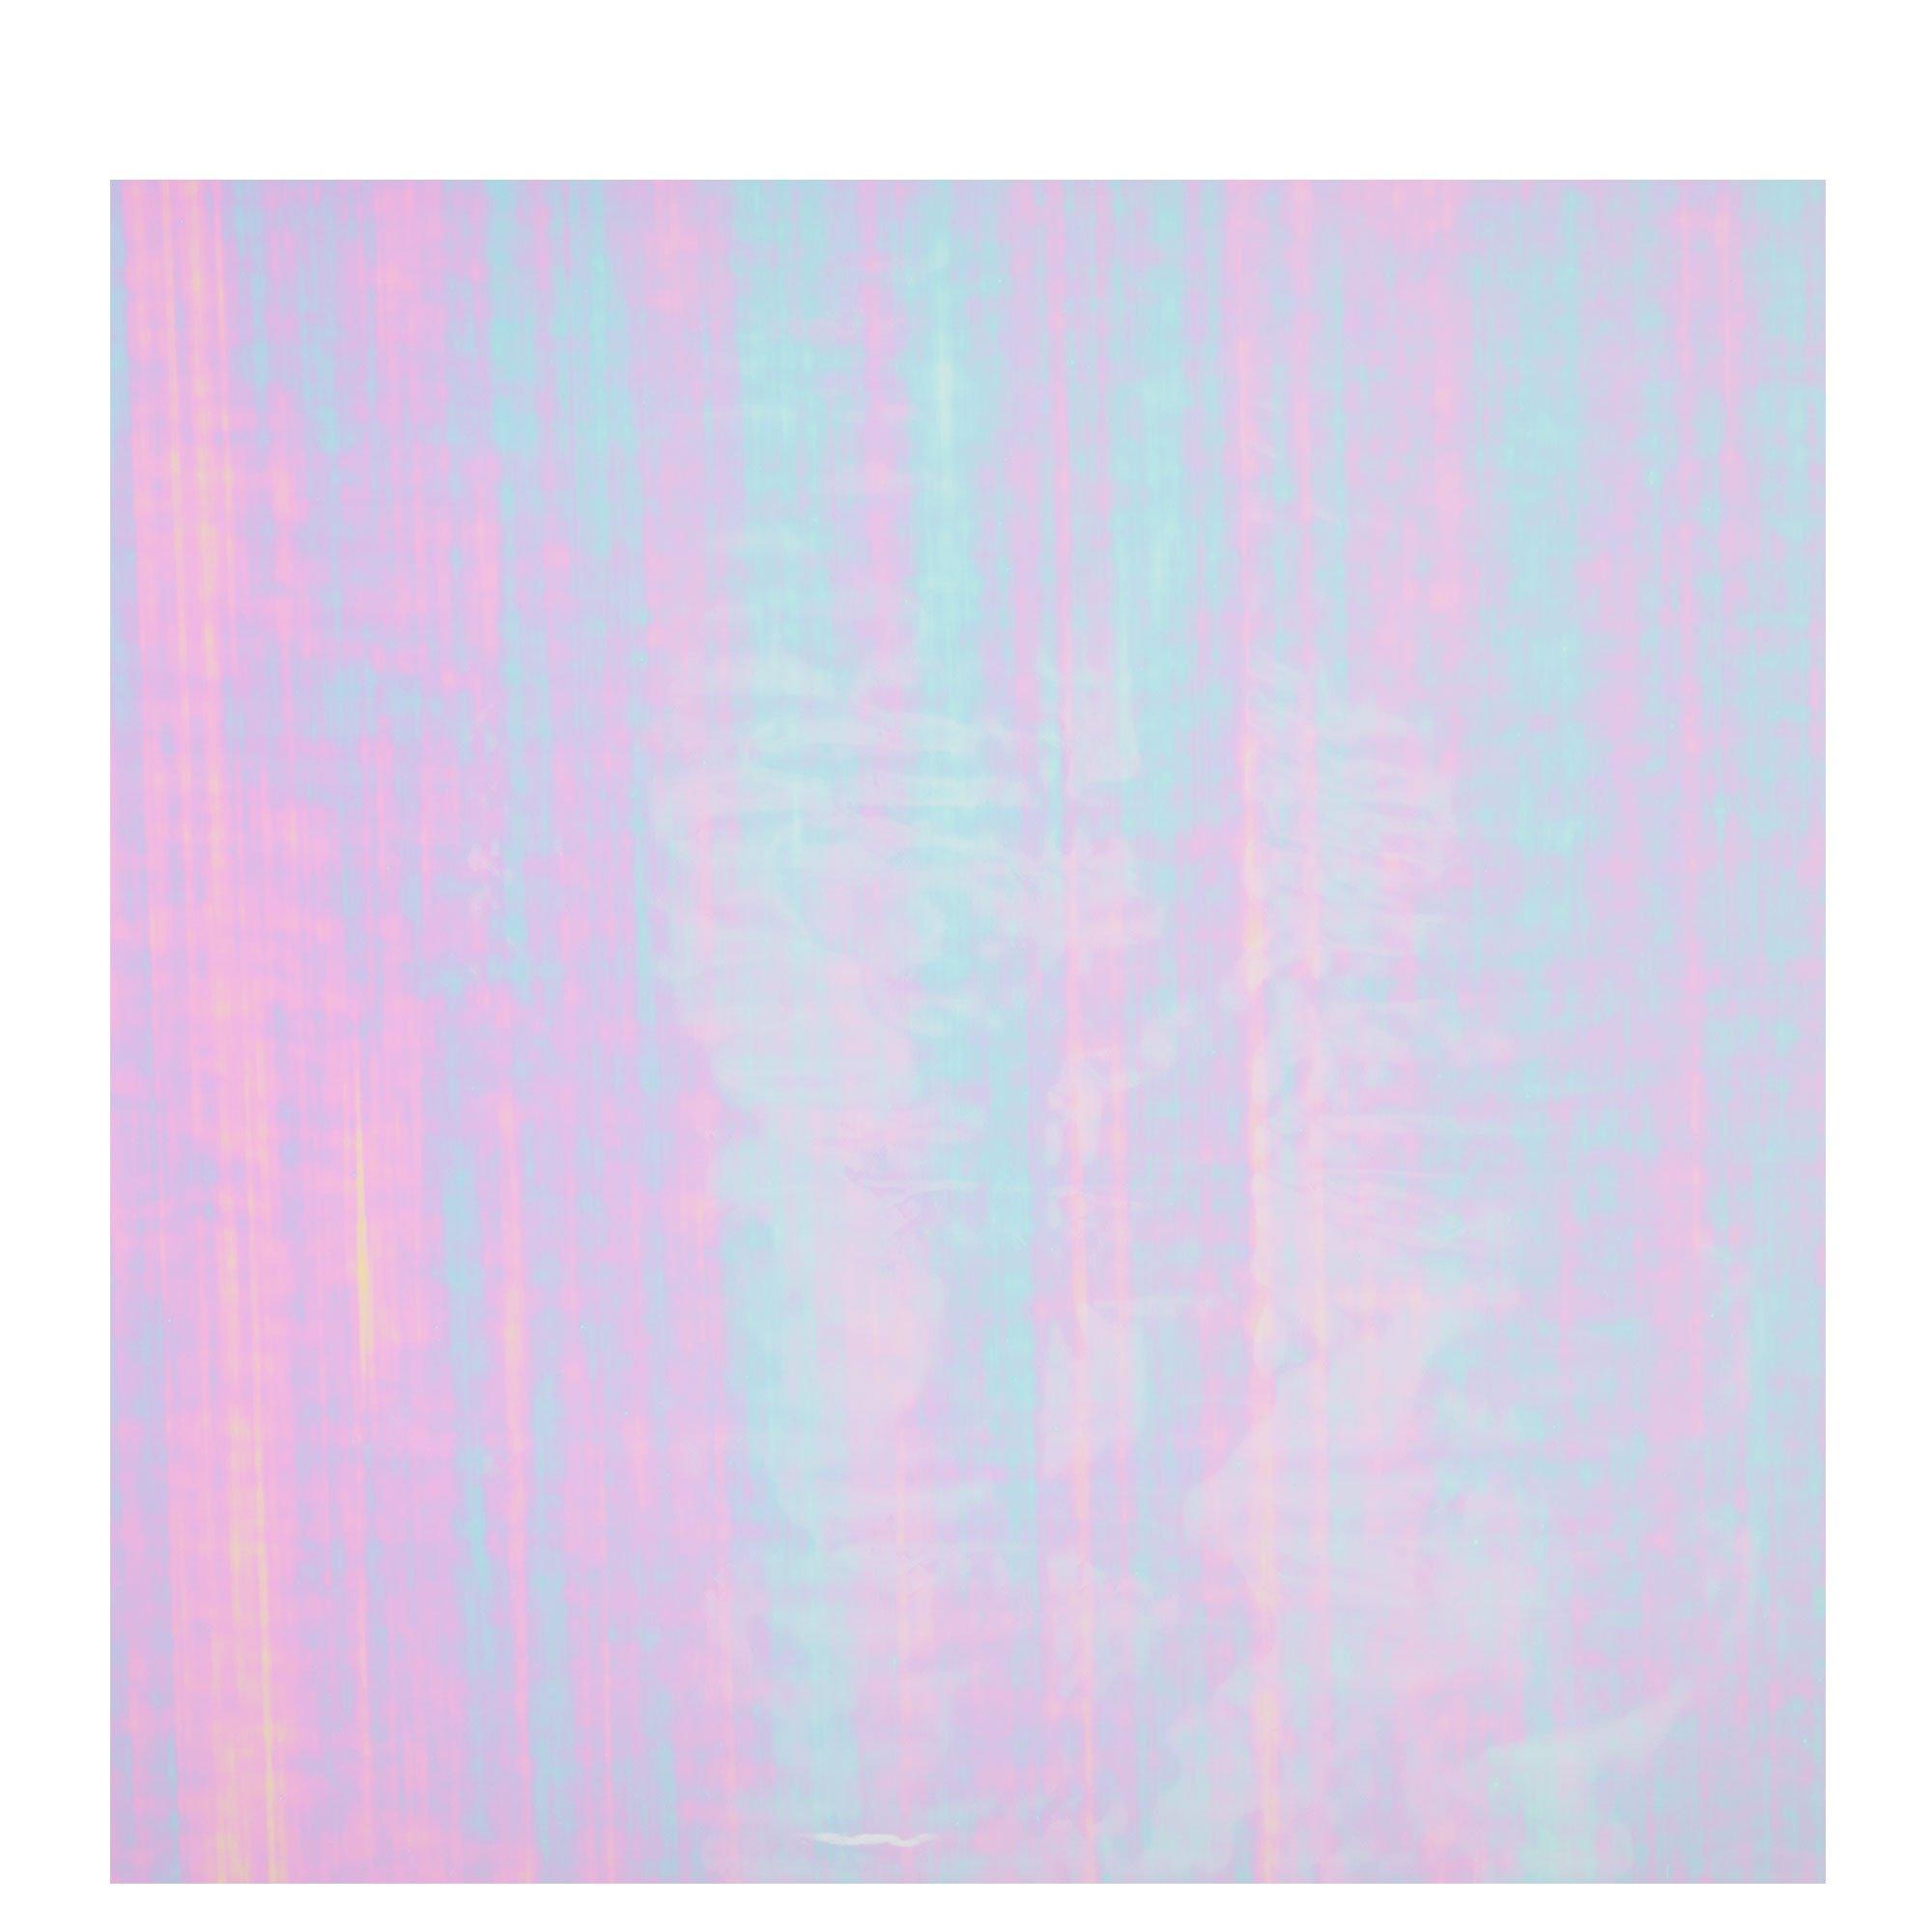 Iridescent Cellophane V Wrapping Paper by Drew's expressions